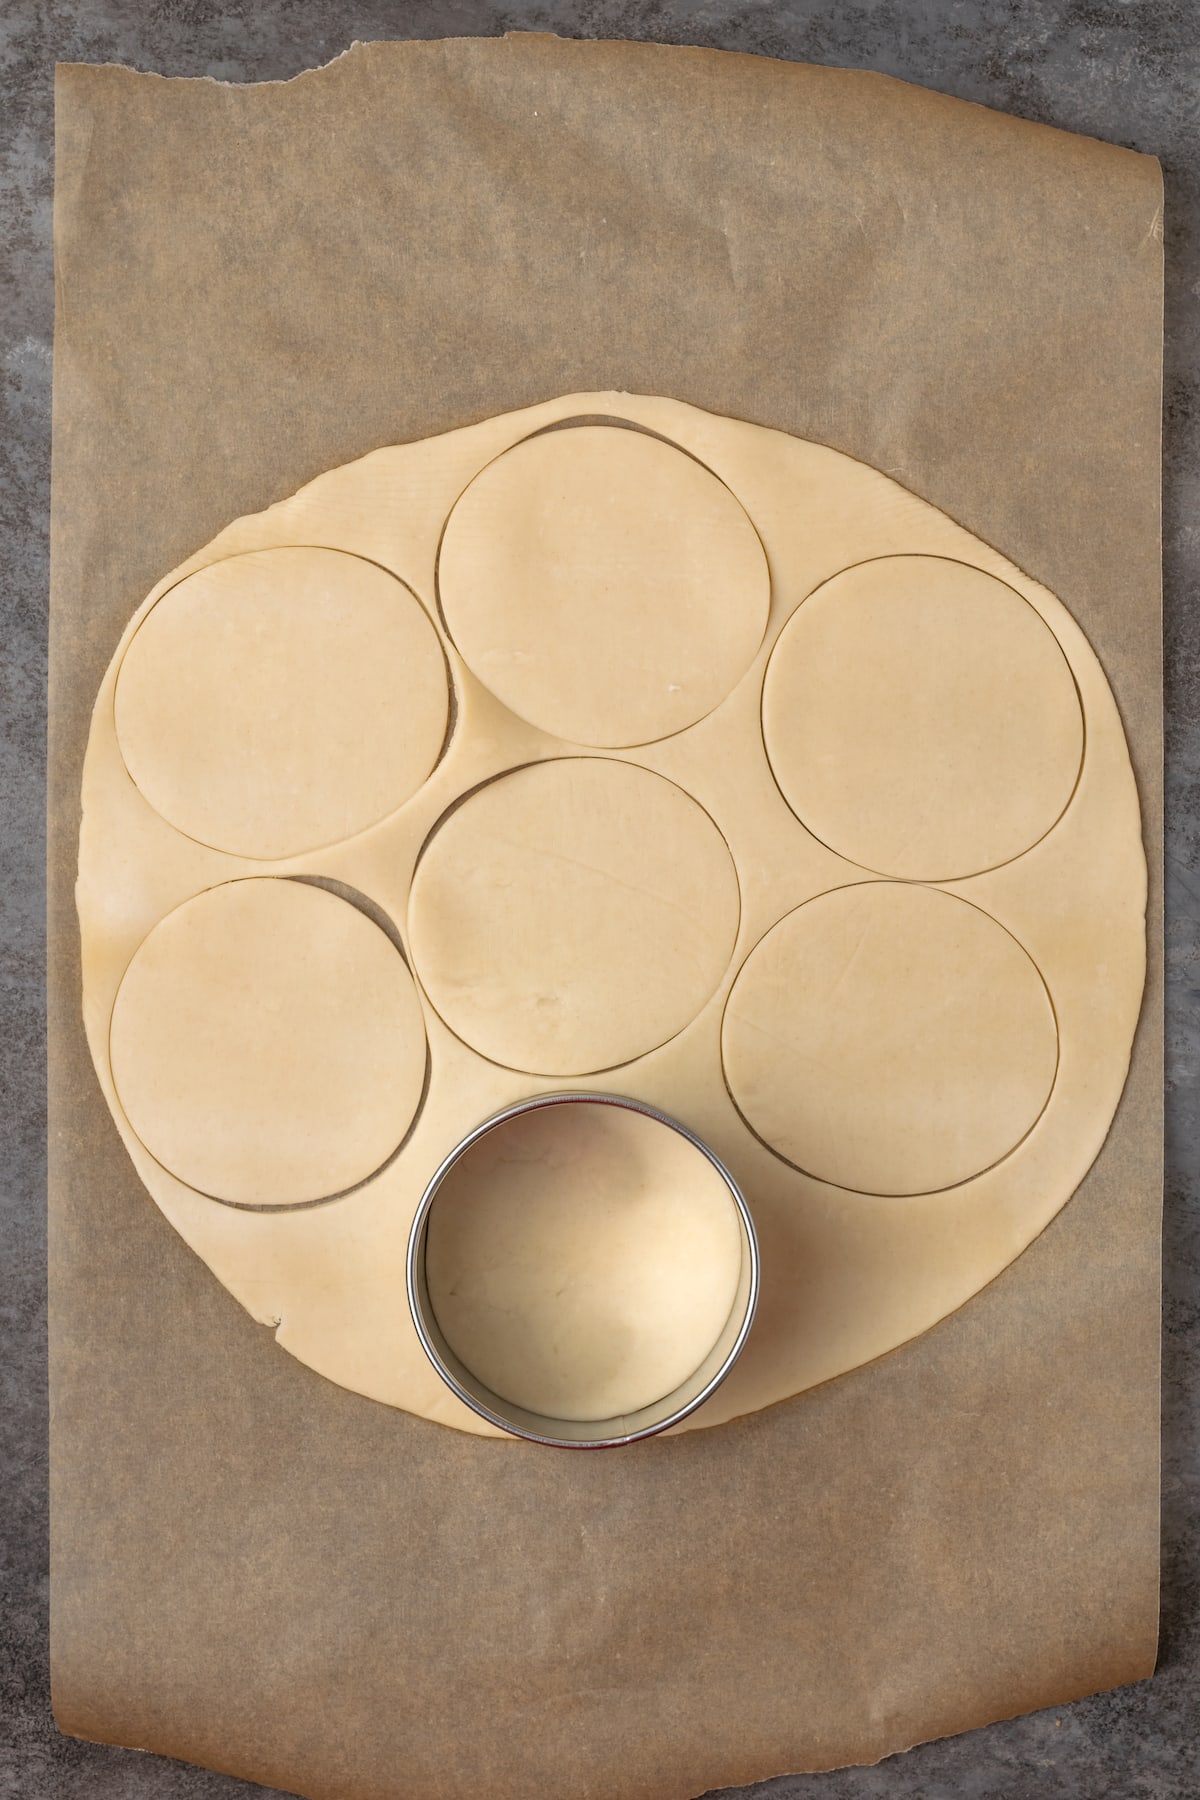 A cookie cutter is used to cut out circles from a rolled out pie crust.